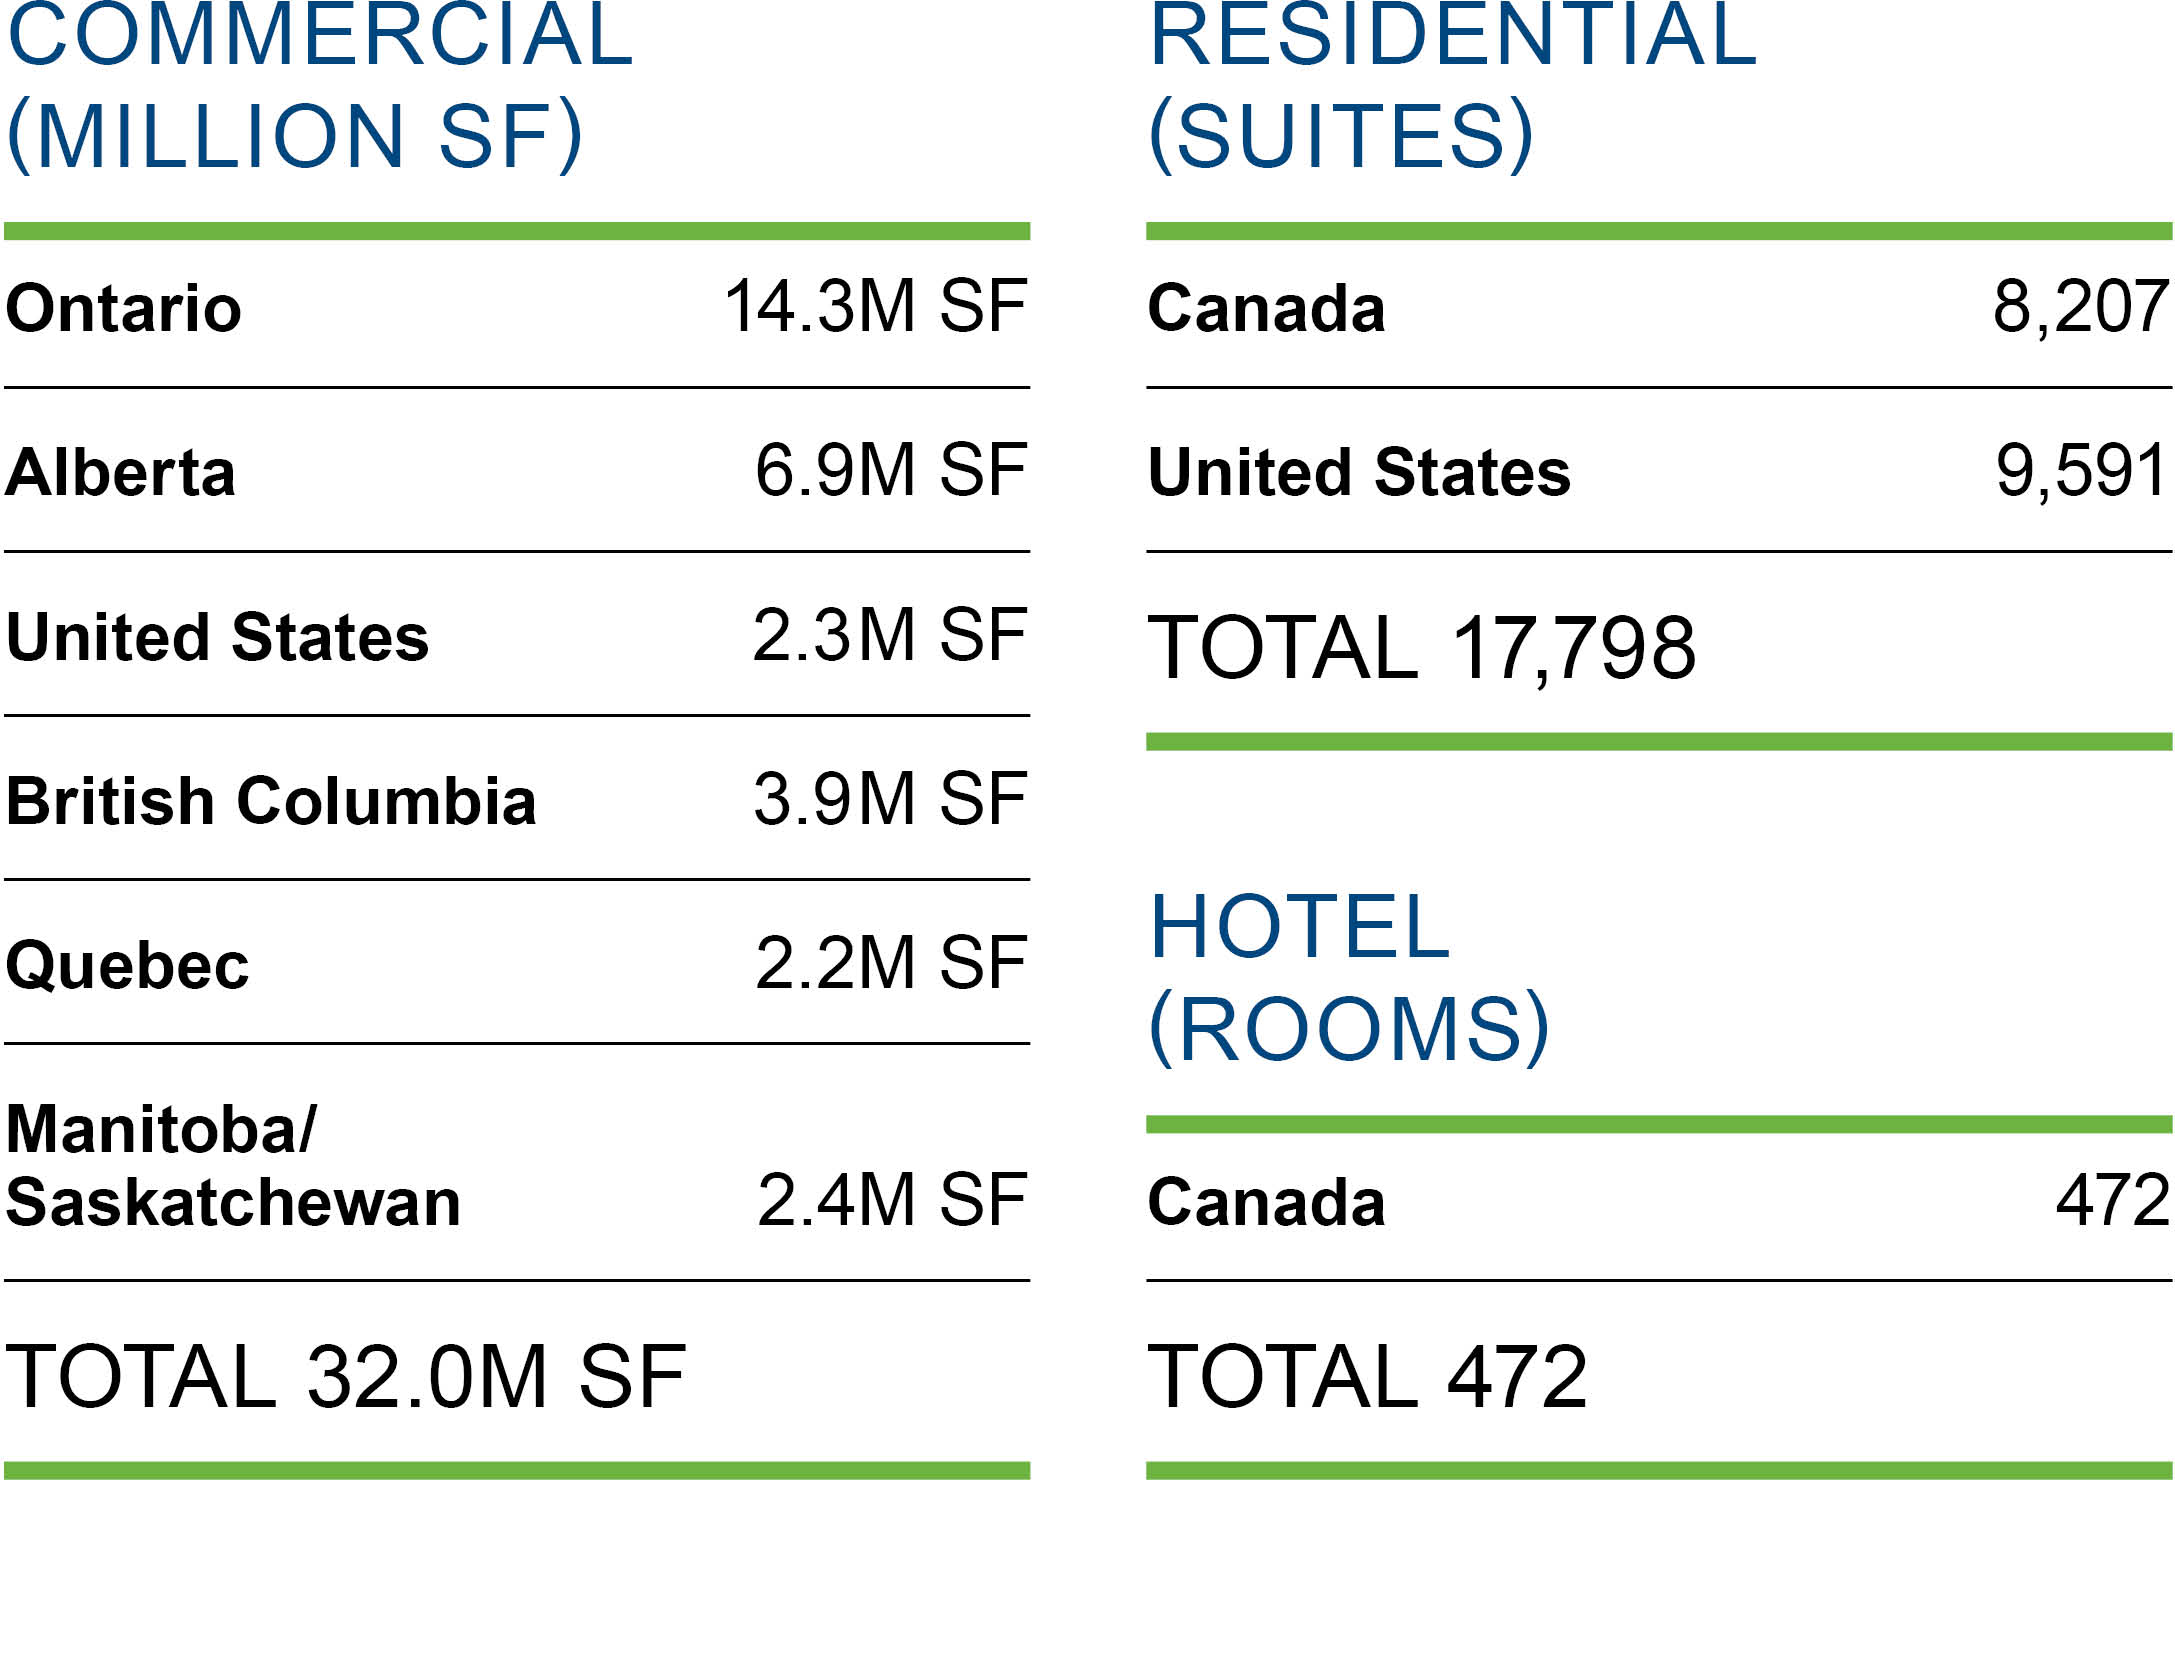 The table shows the breakdown by Geographic Area in commercial, residential and hotel properties.